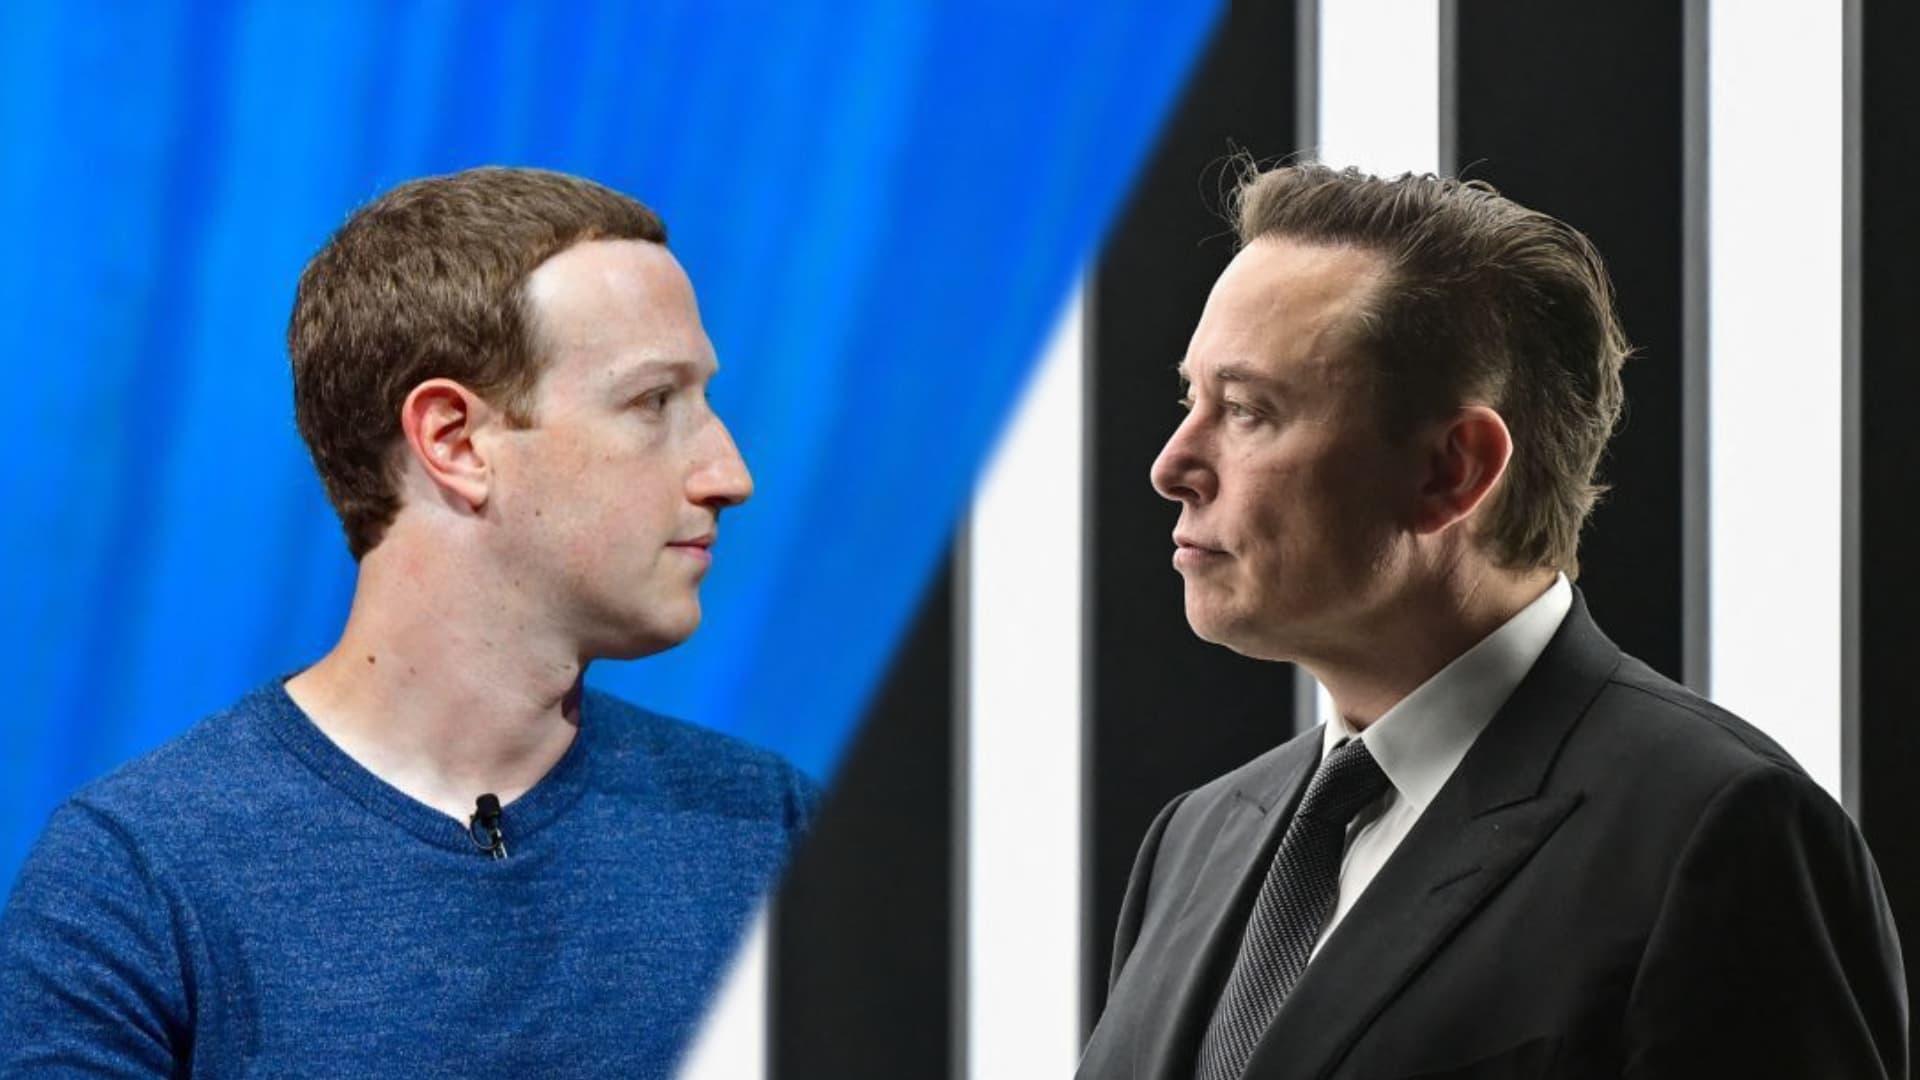 Elon Musk Could Earn up to 275% More from X than Zuckerberg Could Earn on Instagram